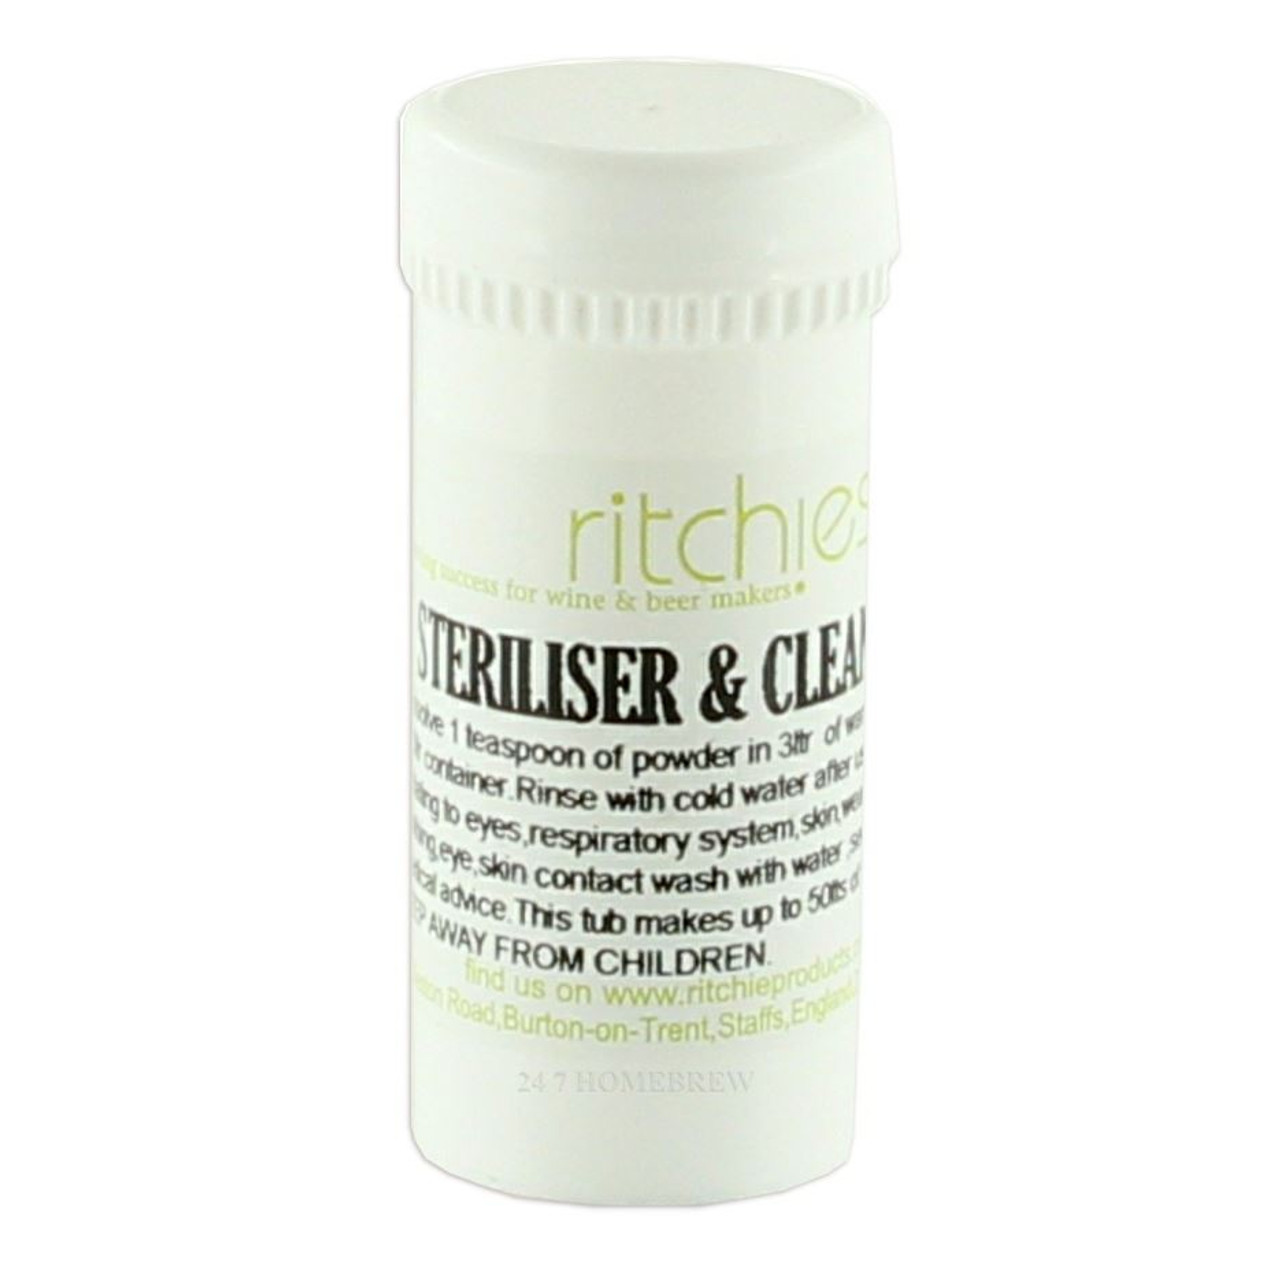 Ritchies Steriliser Cleaner 50g BBE 10-2023